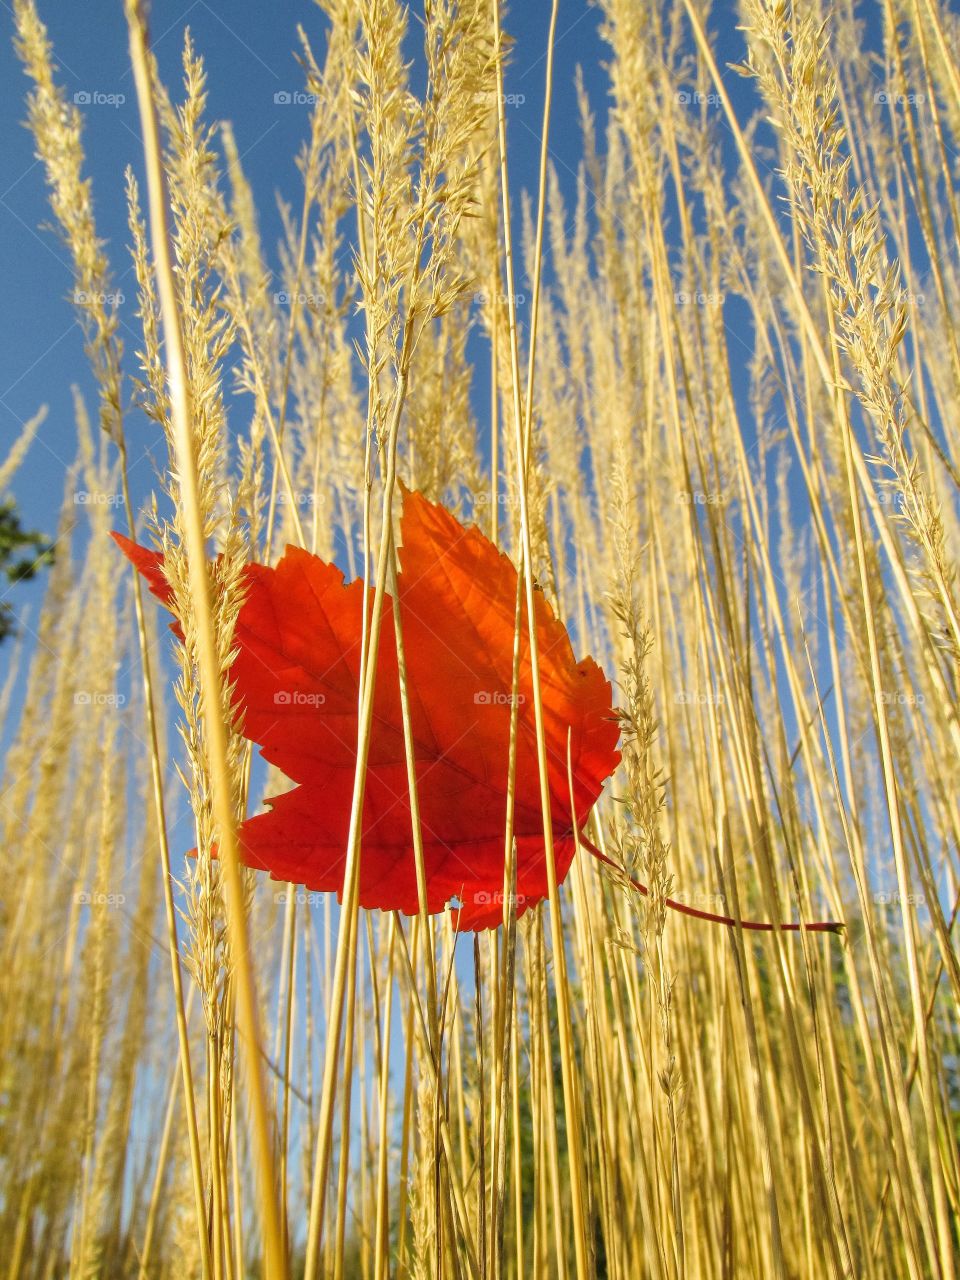 Red leaf caught in wheat stalks - It’s Autumn Time Mission